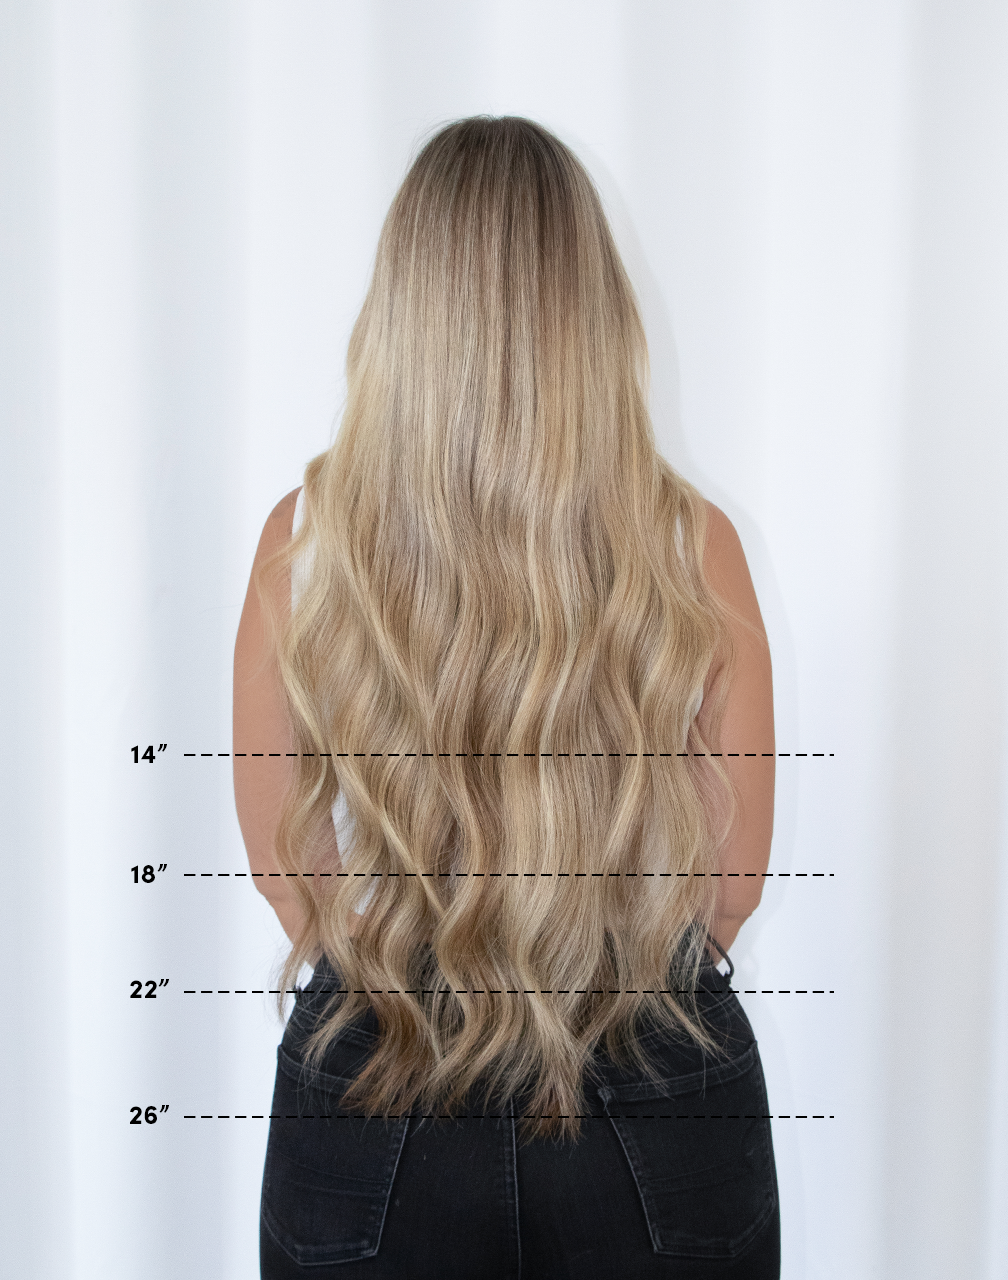 Length chart showing model with blonde hair at 14", 18", 22", 26" lengths